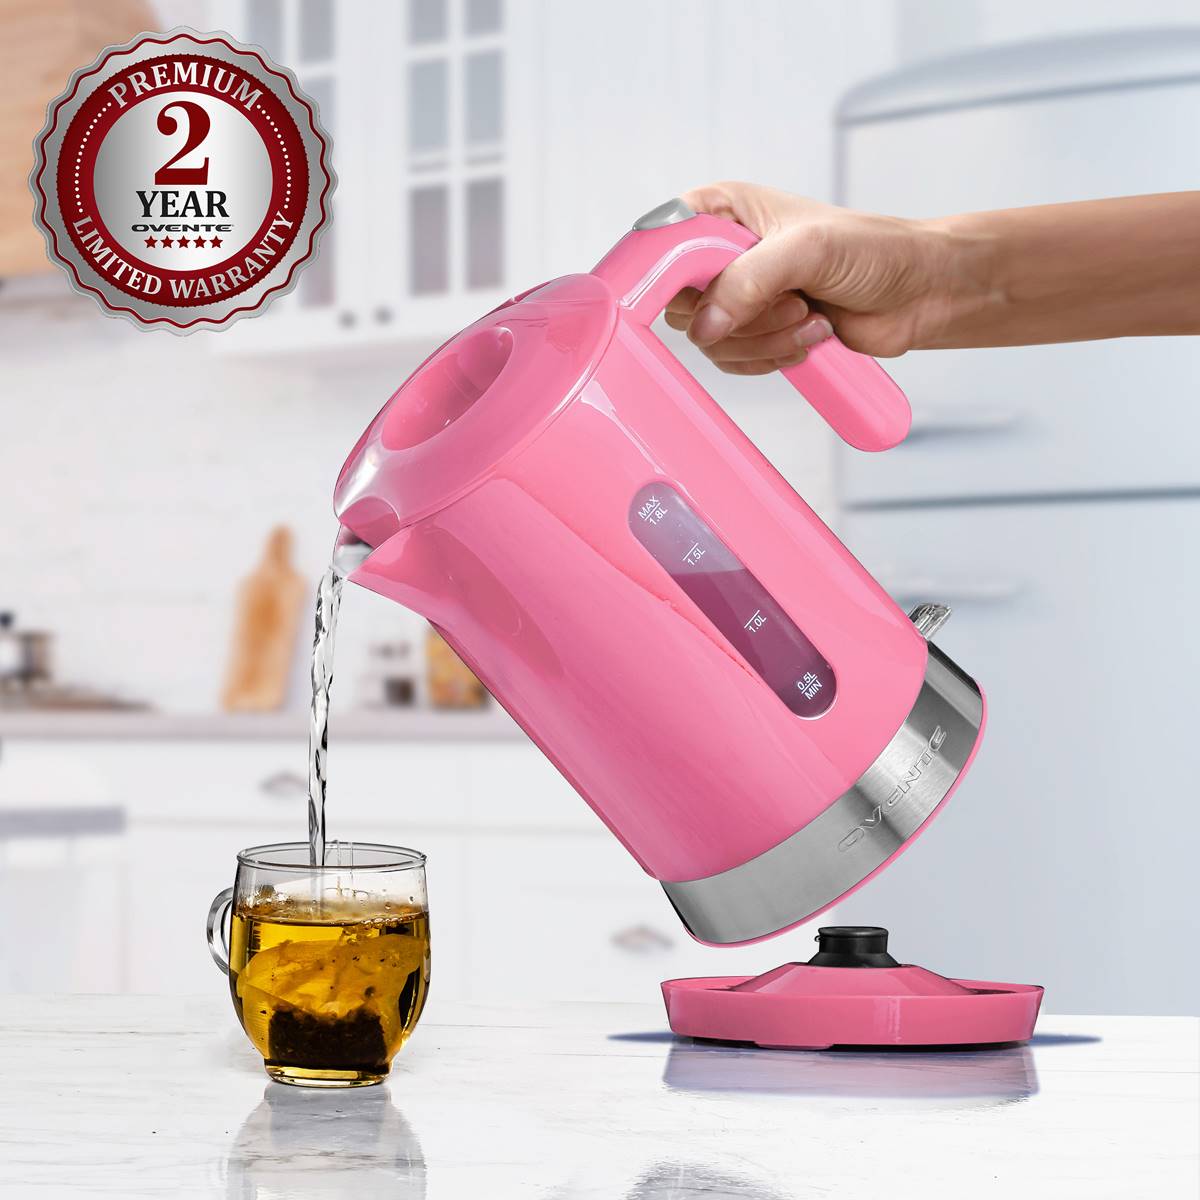 Ovente 1.8 Liter Electric Kettle W/ ProntoFill(tm) Lid - Pink